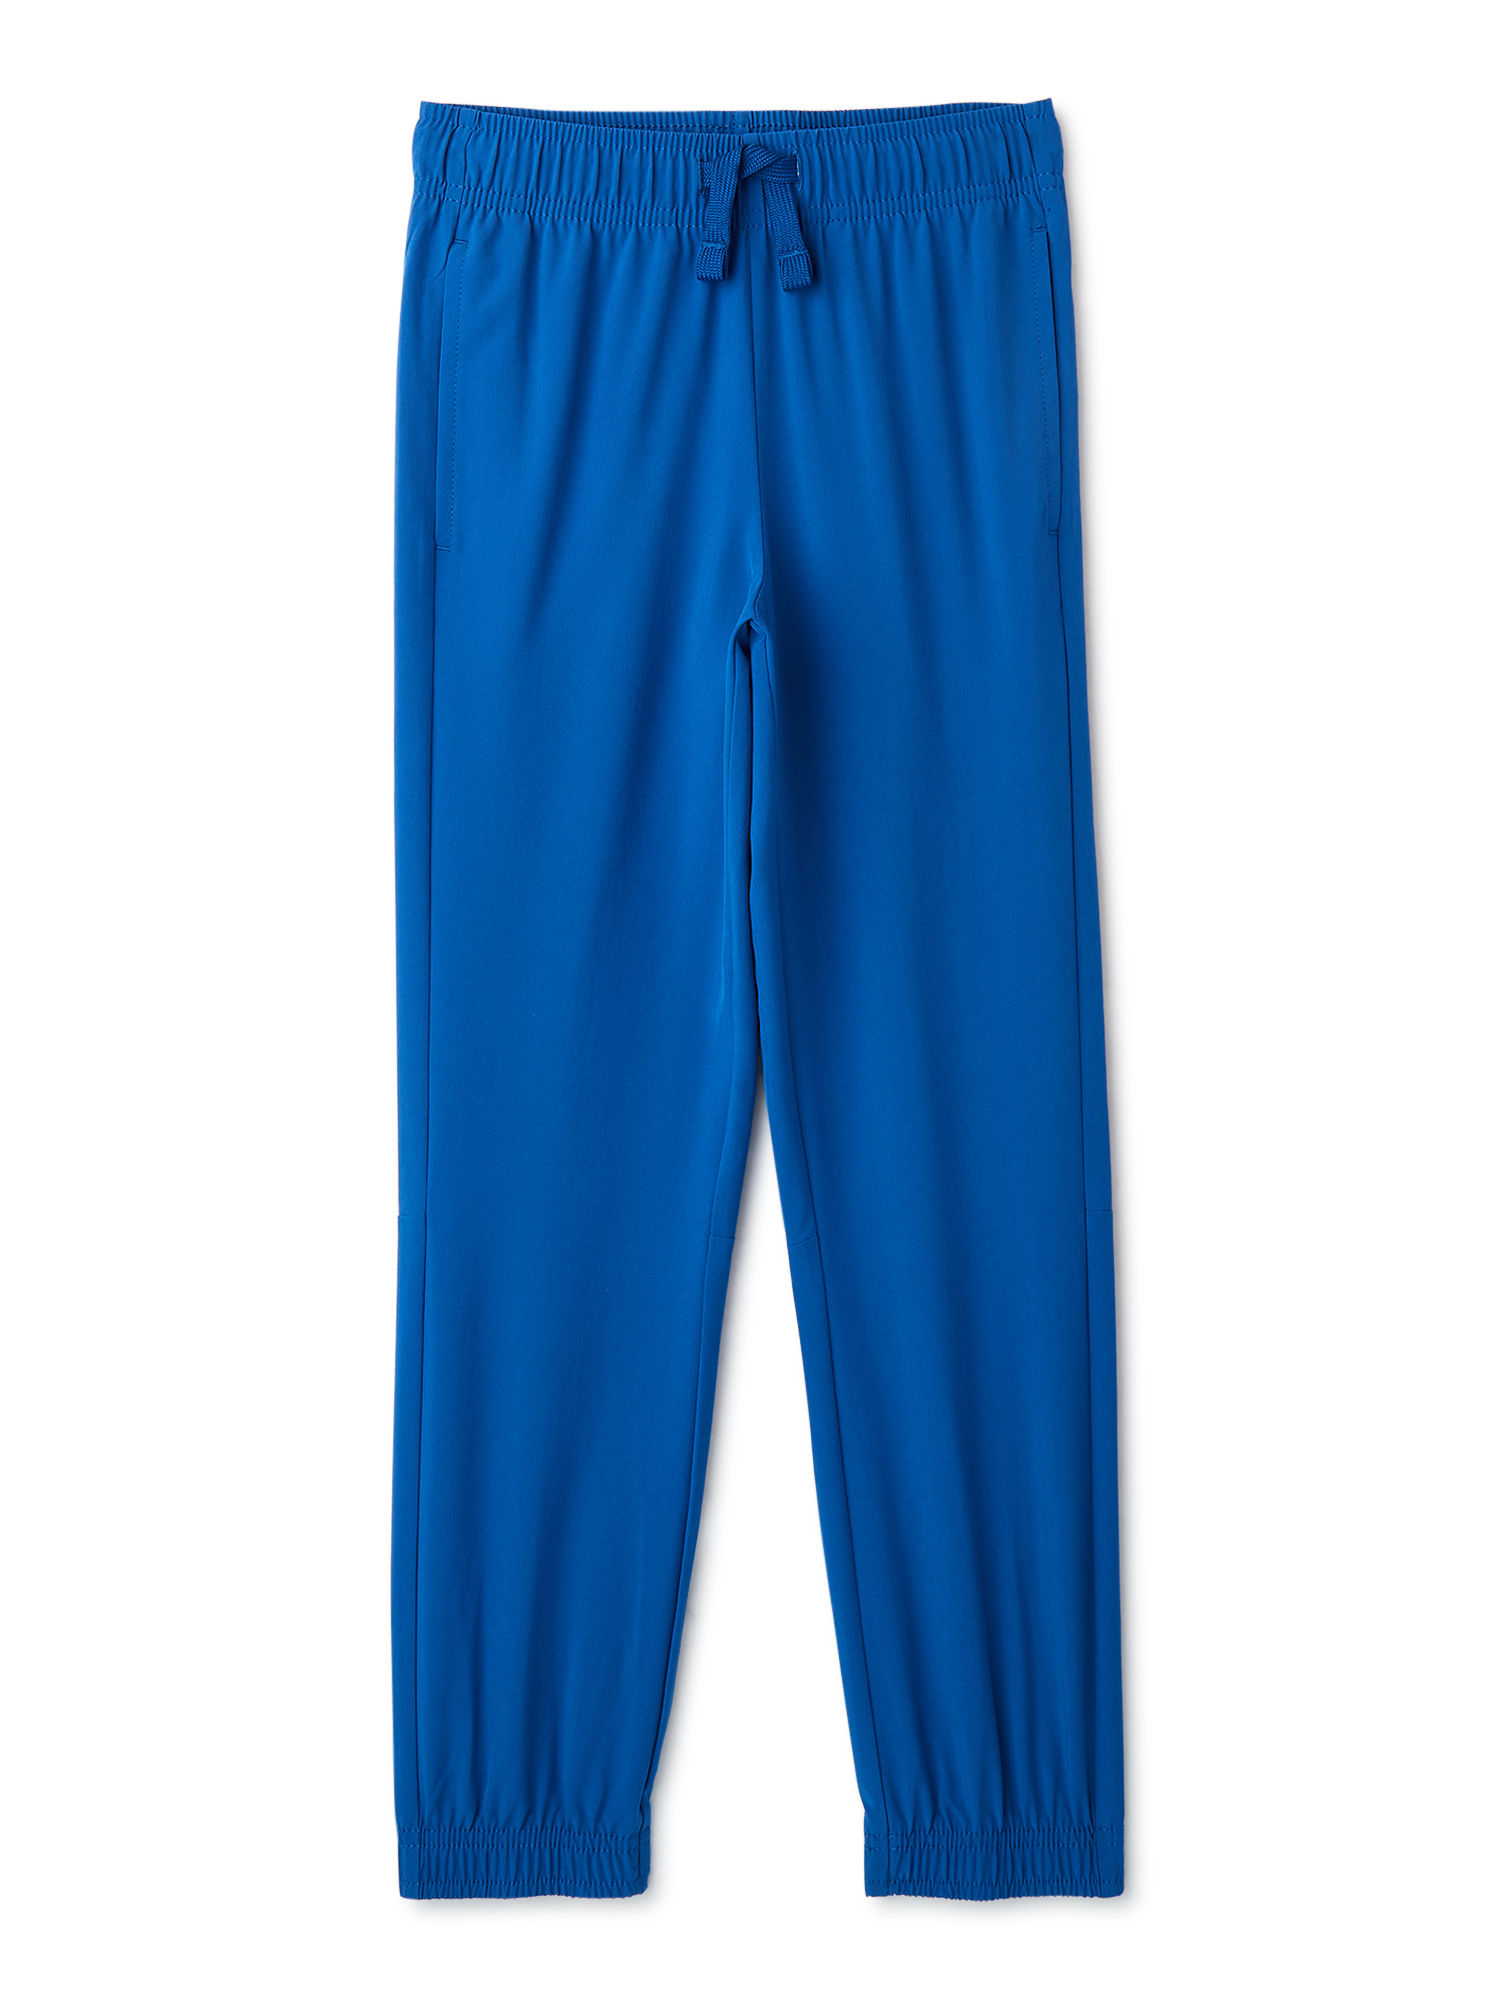 Athletic Works Boys Woven Stretch Jogger Pants, Sizes 4-18 & Husky ...